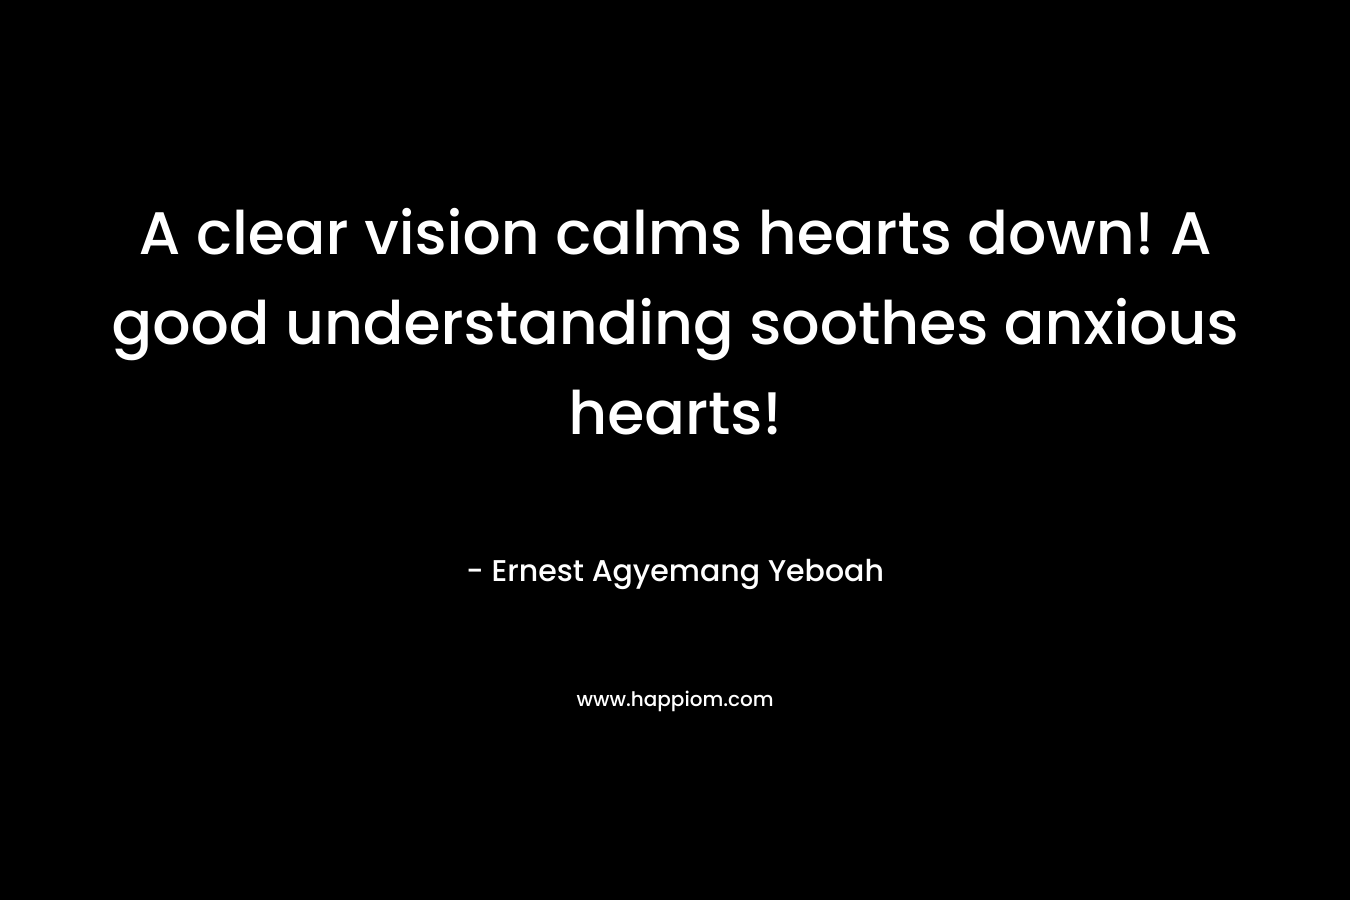 A clear vision calms hearts down! A good understanding soothes anxious hearts! – Ernest Agyemang Yeboah